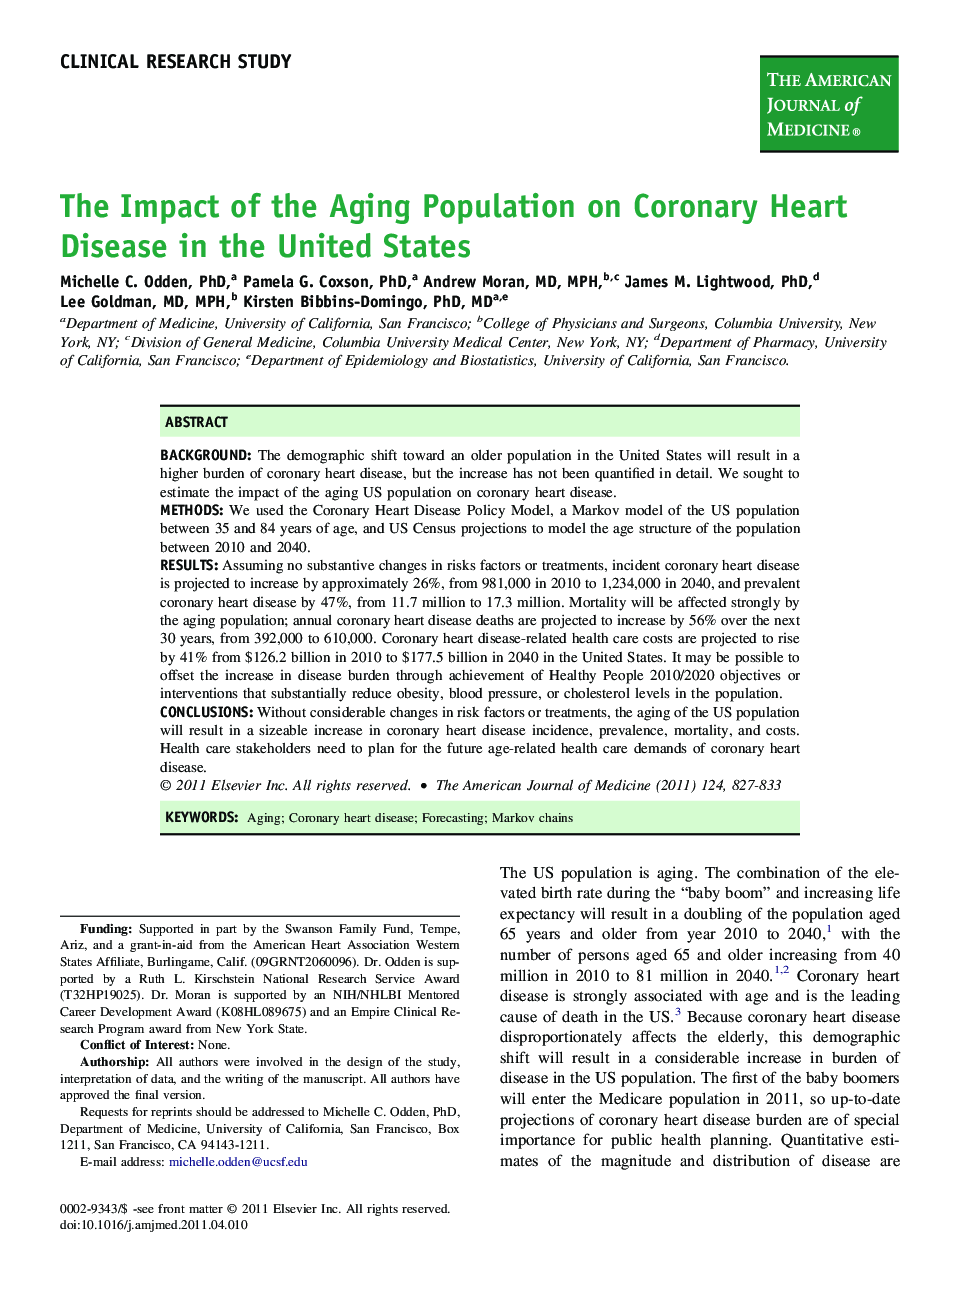 The Impact of the Aging Population on Coronary Heart Disease in the United States